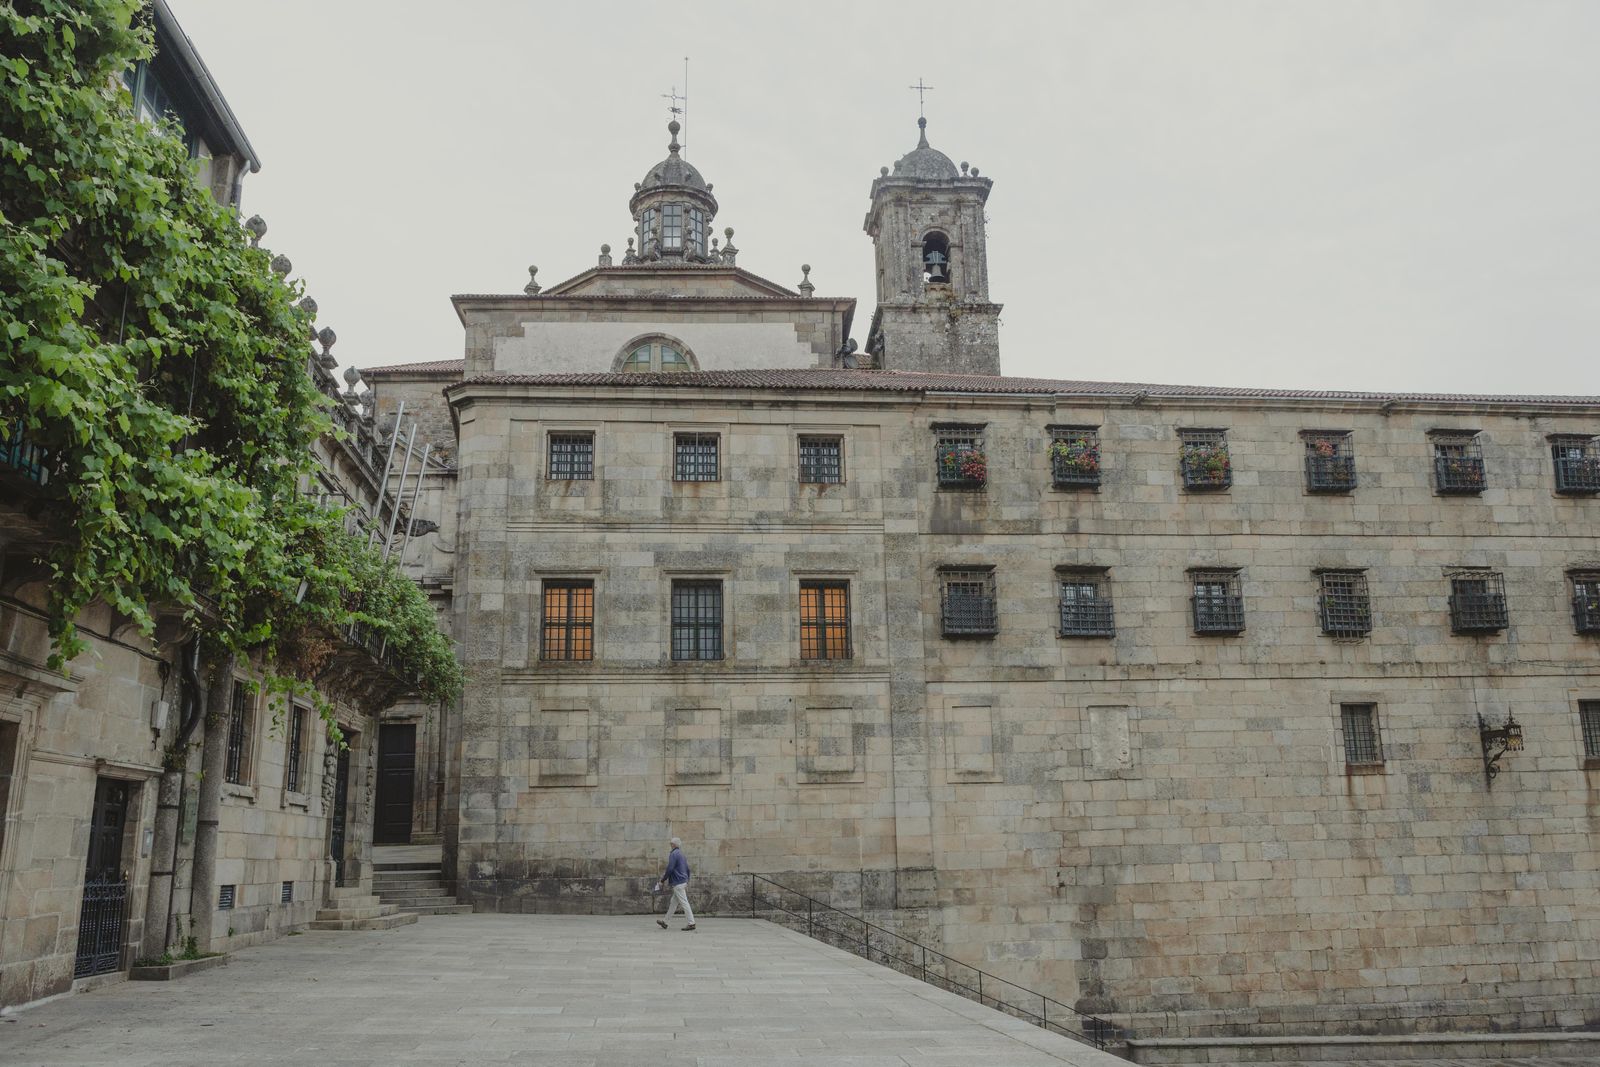 © Ana Norman Bermudez - The San Paio convent in Santiago de Compostela, inhabited by cloistered nuns since the 15th century.